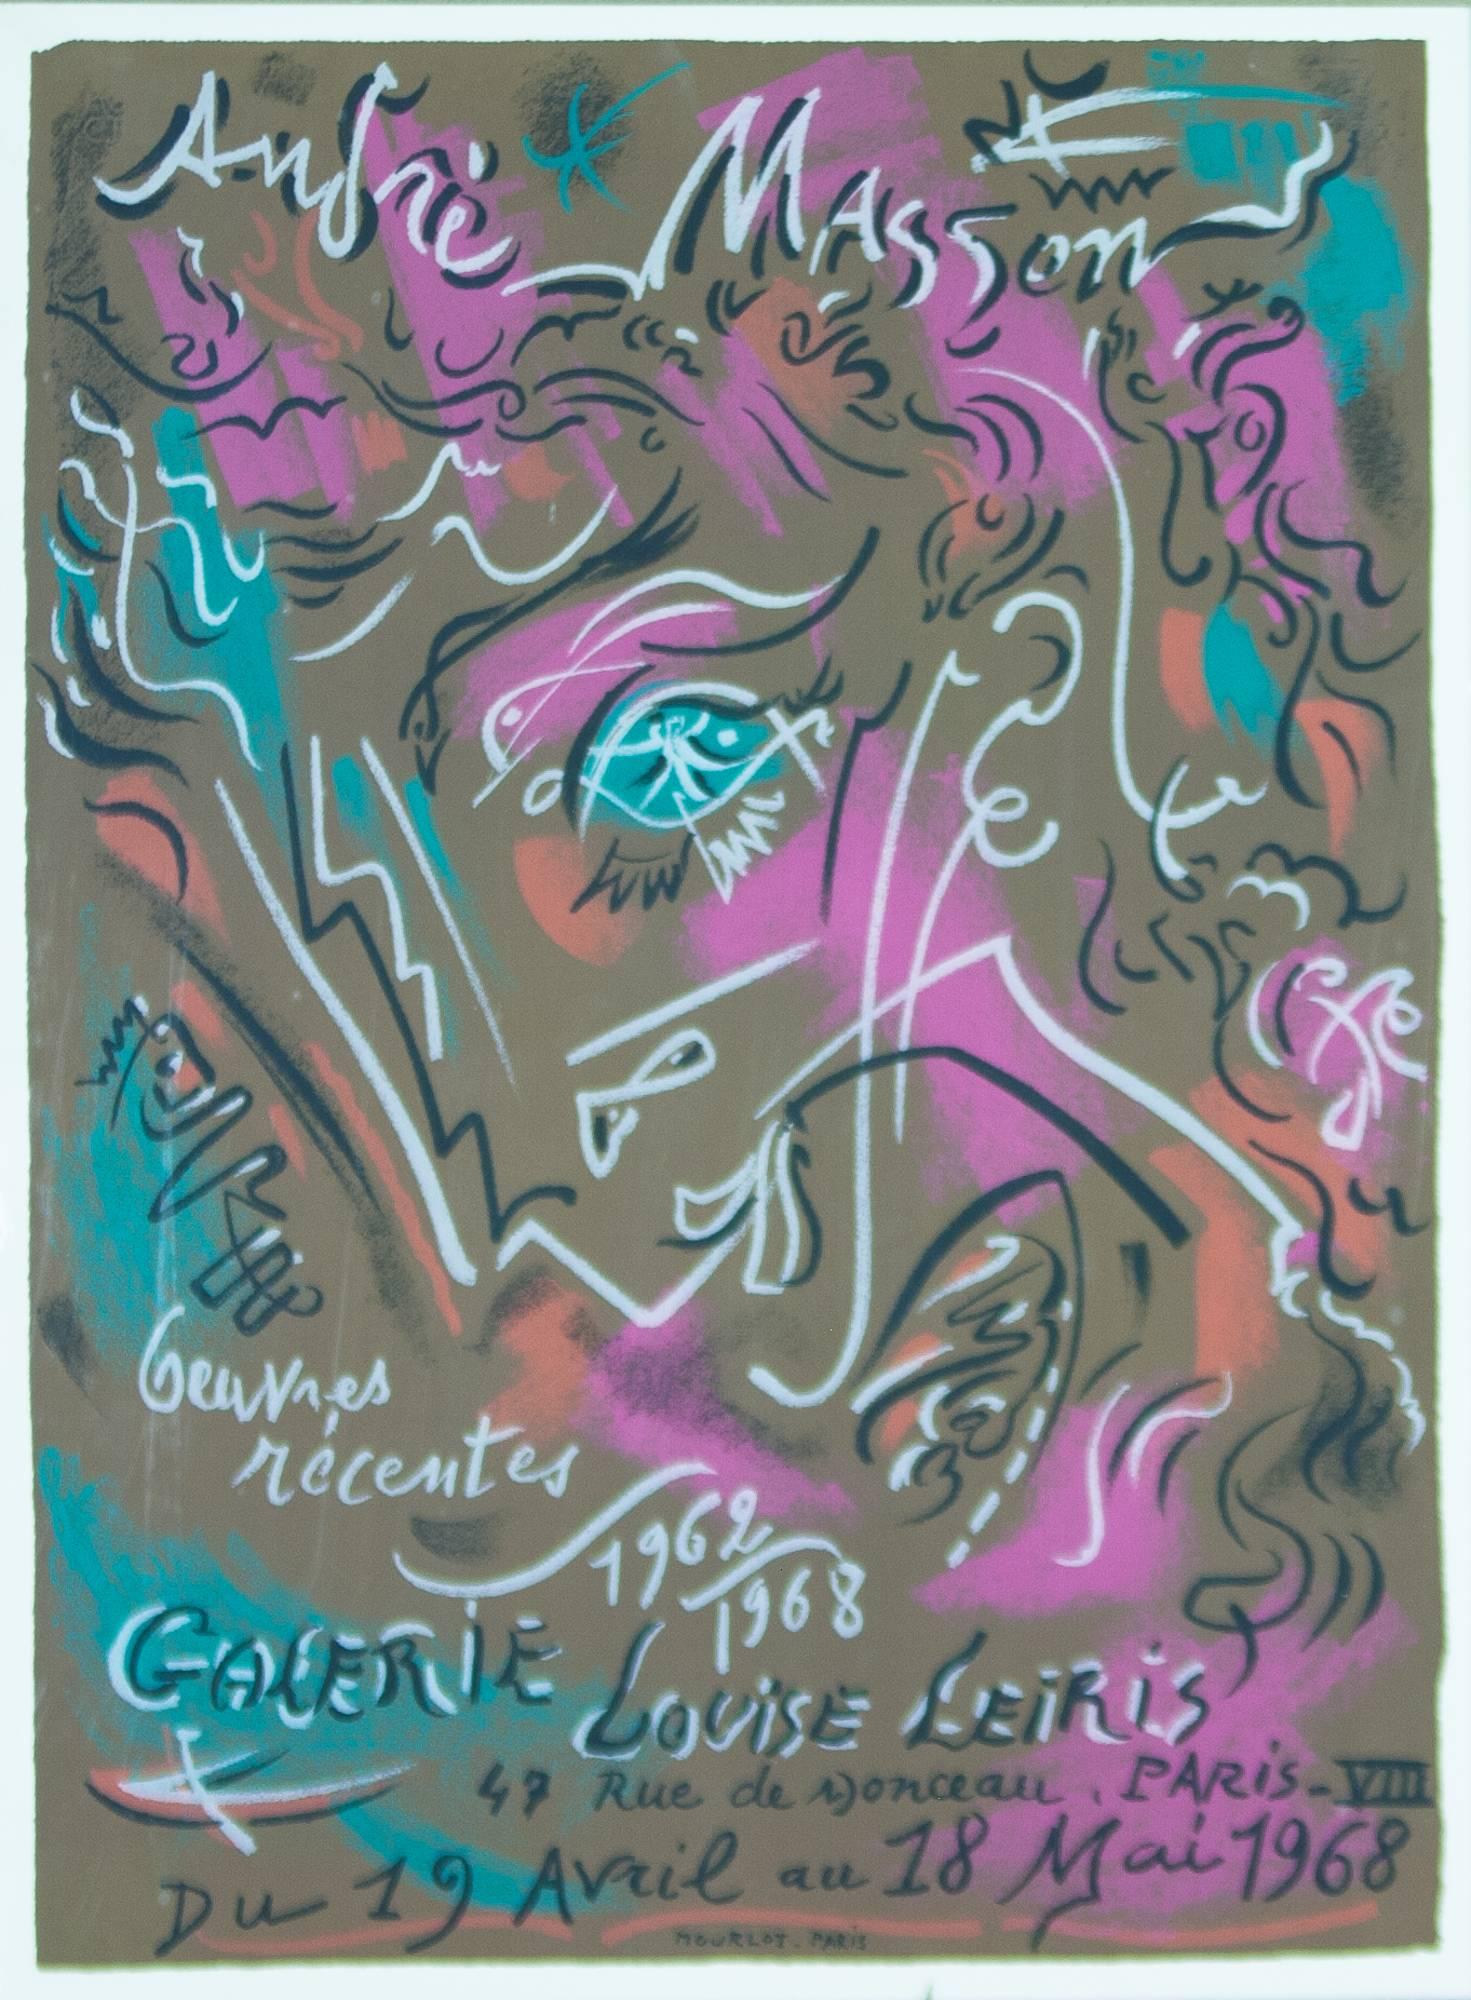 André Masson Abstract Print – Andre Masson: „Exposition de ses œuvres récentes 1962-1968“ in der Galerie Louise